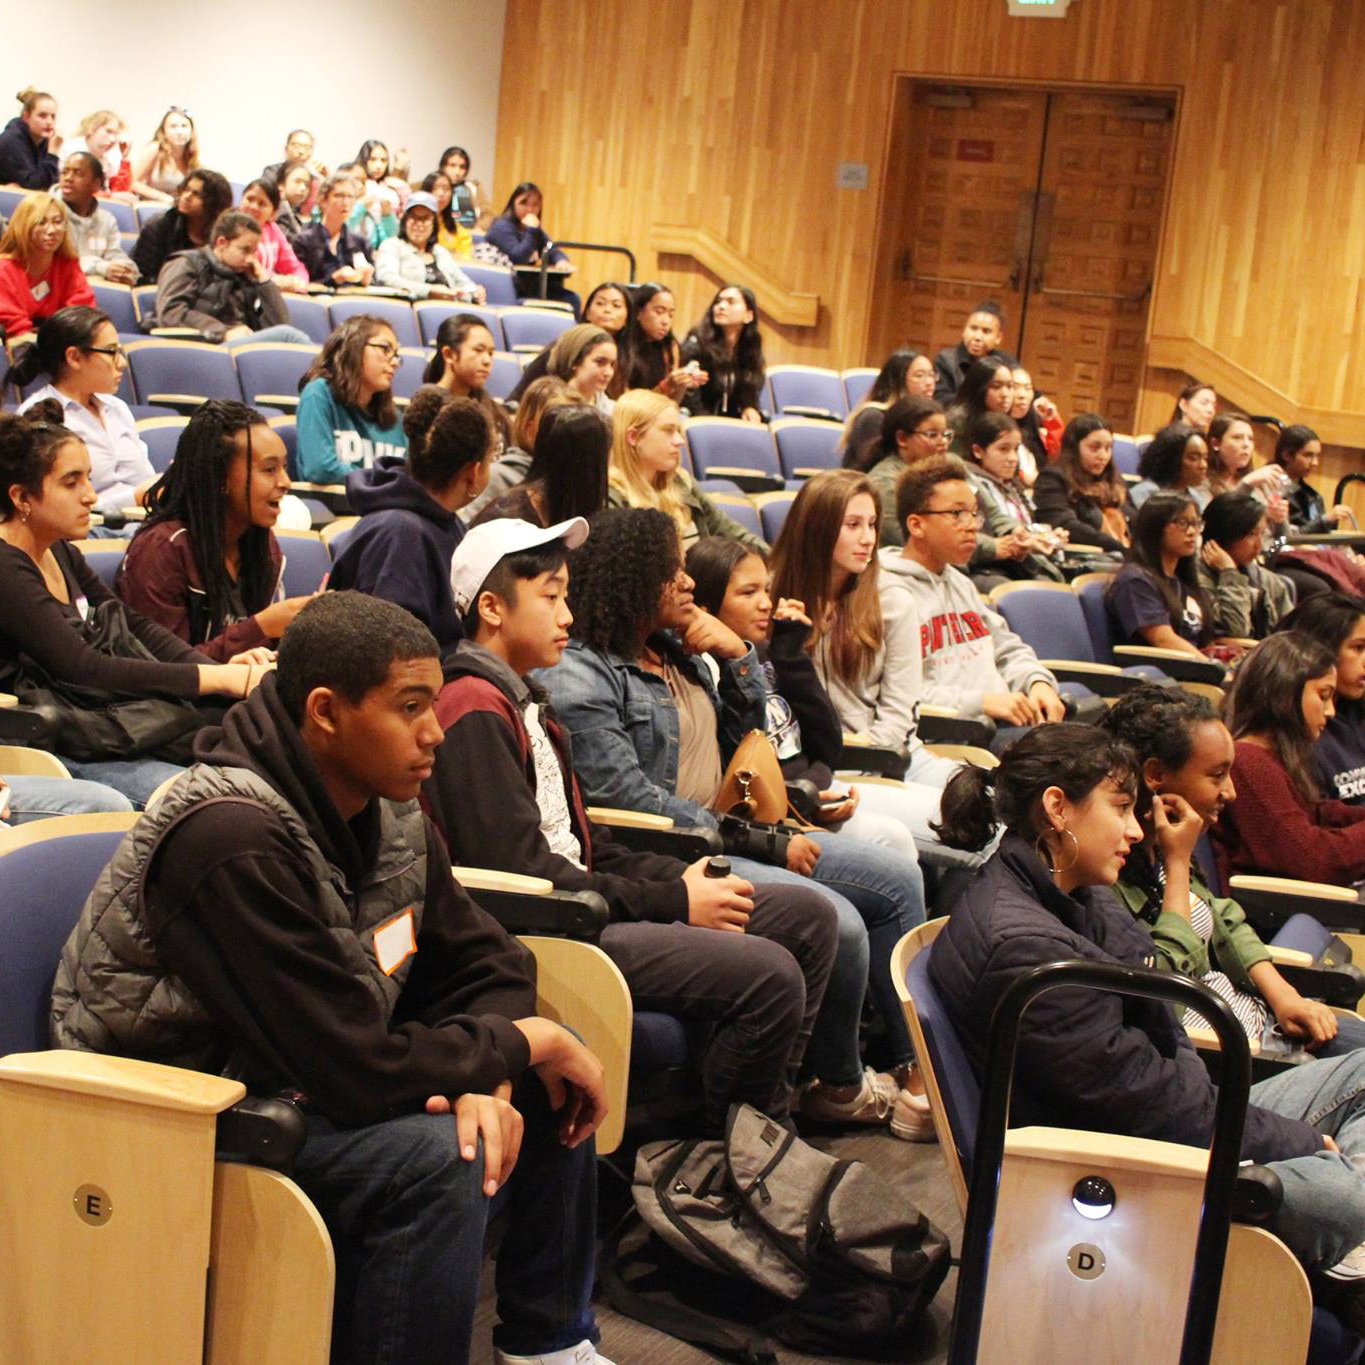 Students in the auditorium watching the welcome presentation.